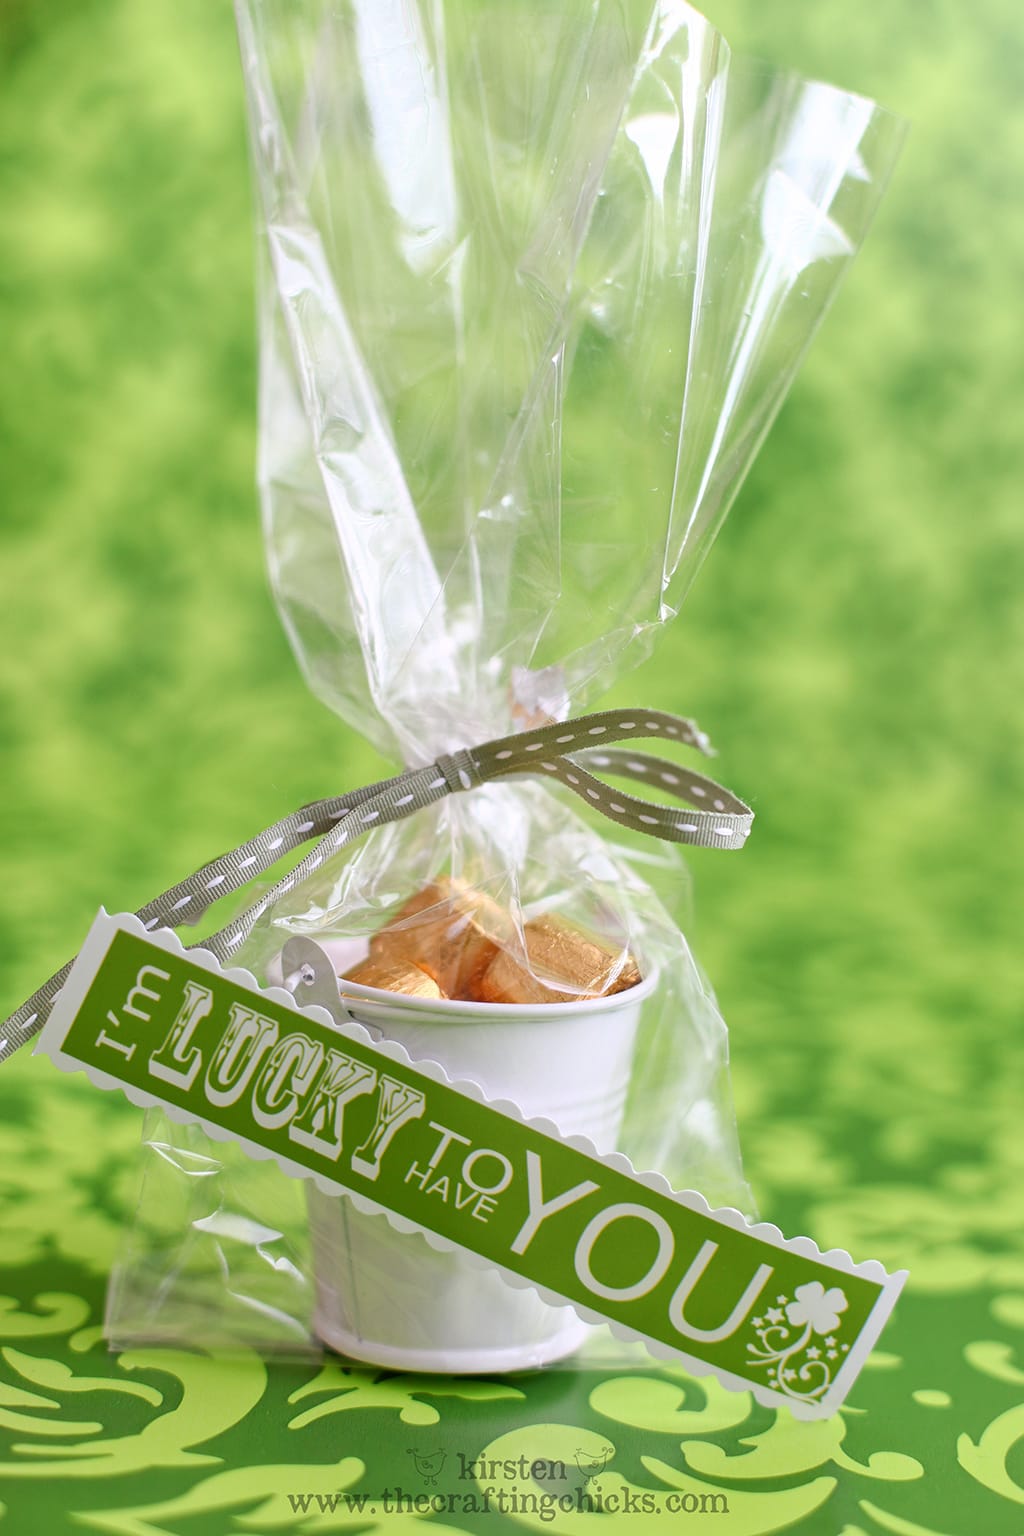 Green background withe small white buckets filled with gold wrapped candies in a clear cellophane bag and a green ribbon. A printable tag is attached that says "I'm lucky to have you."